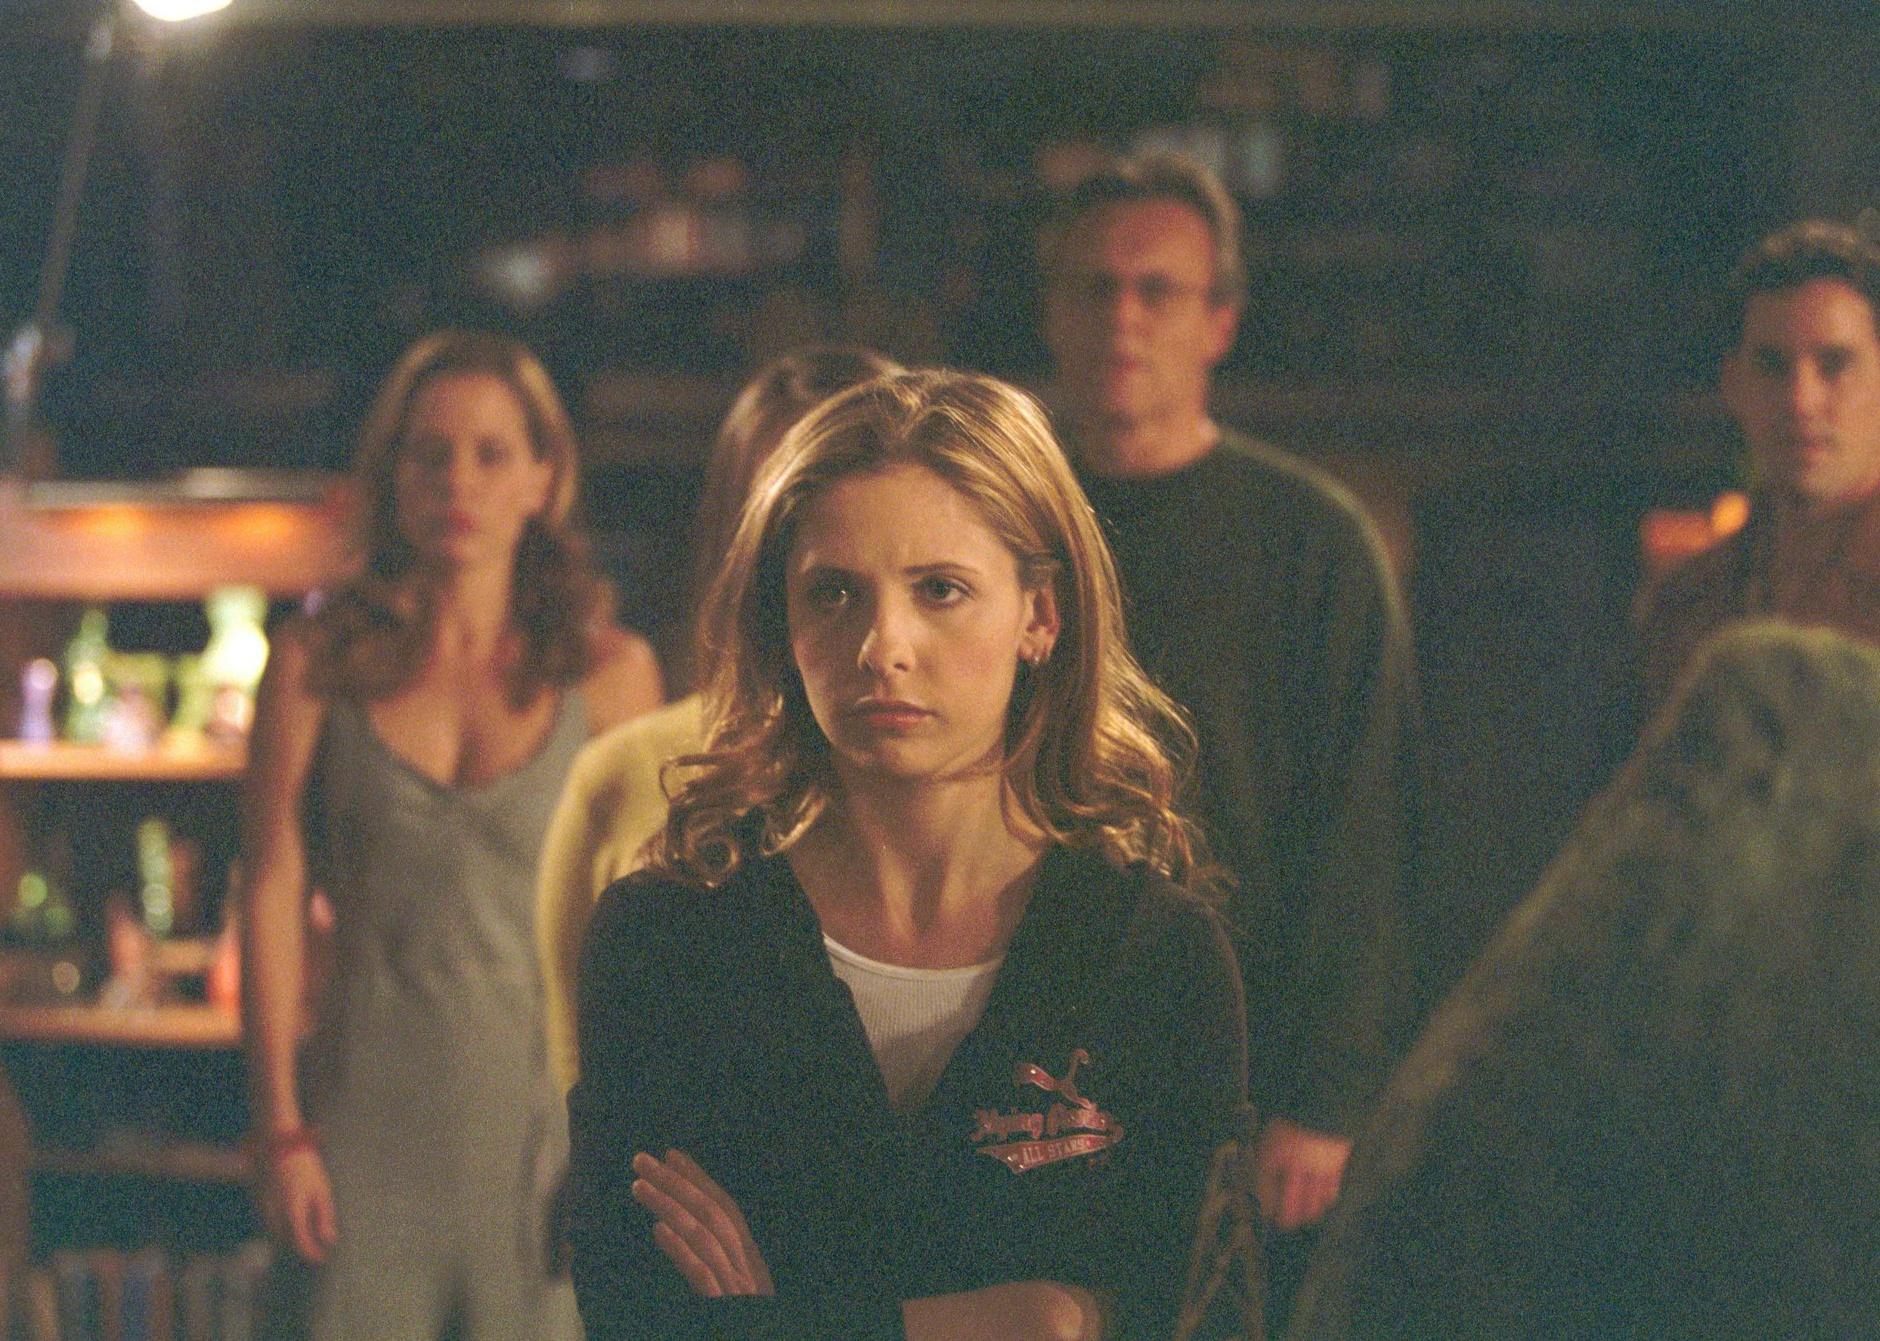 Sarah Michelle Gellar standing with arms crossed in front of a group of people.